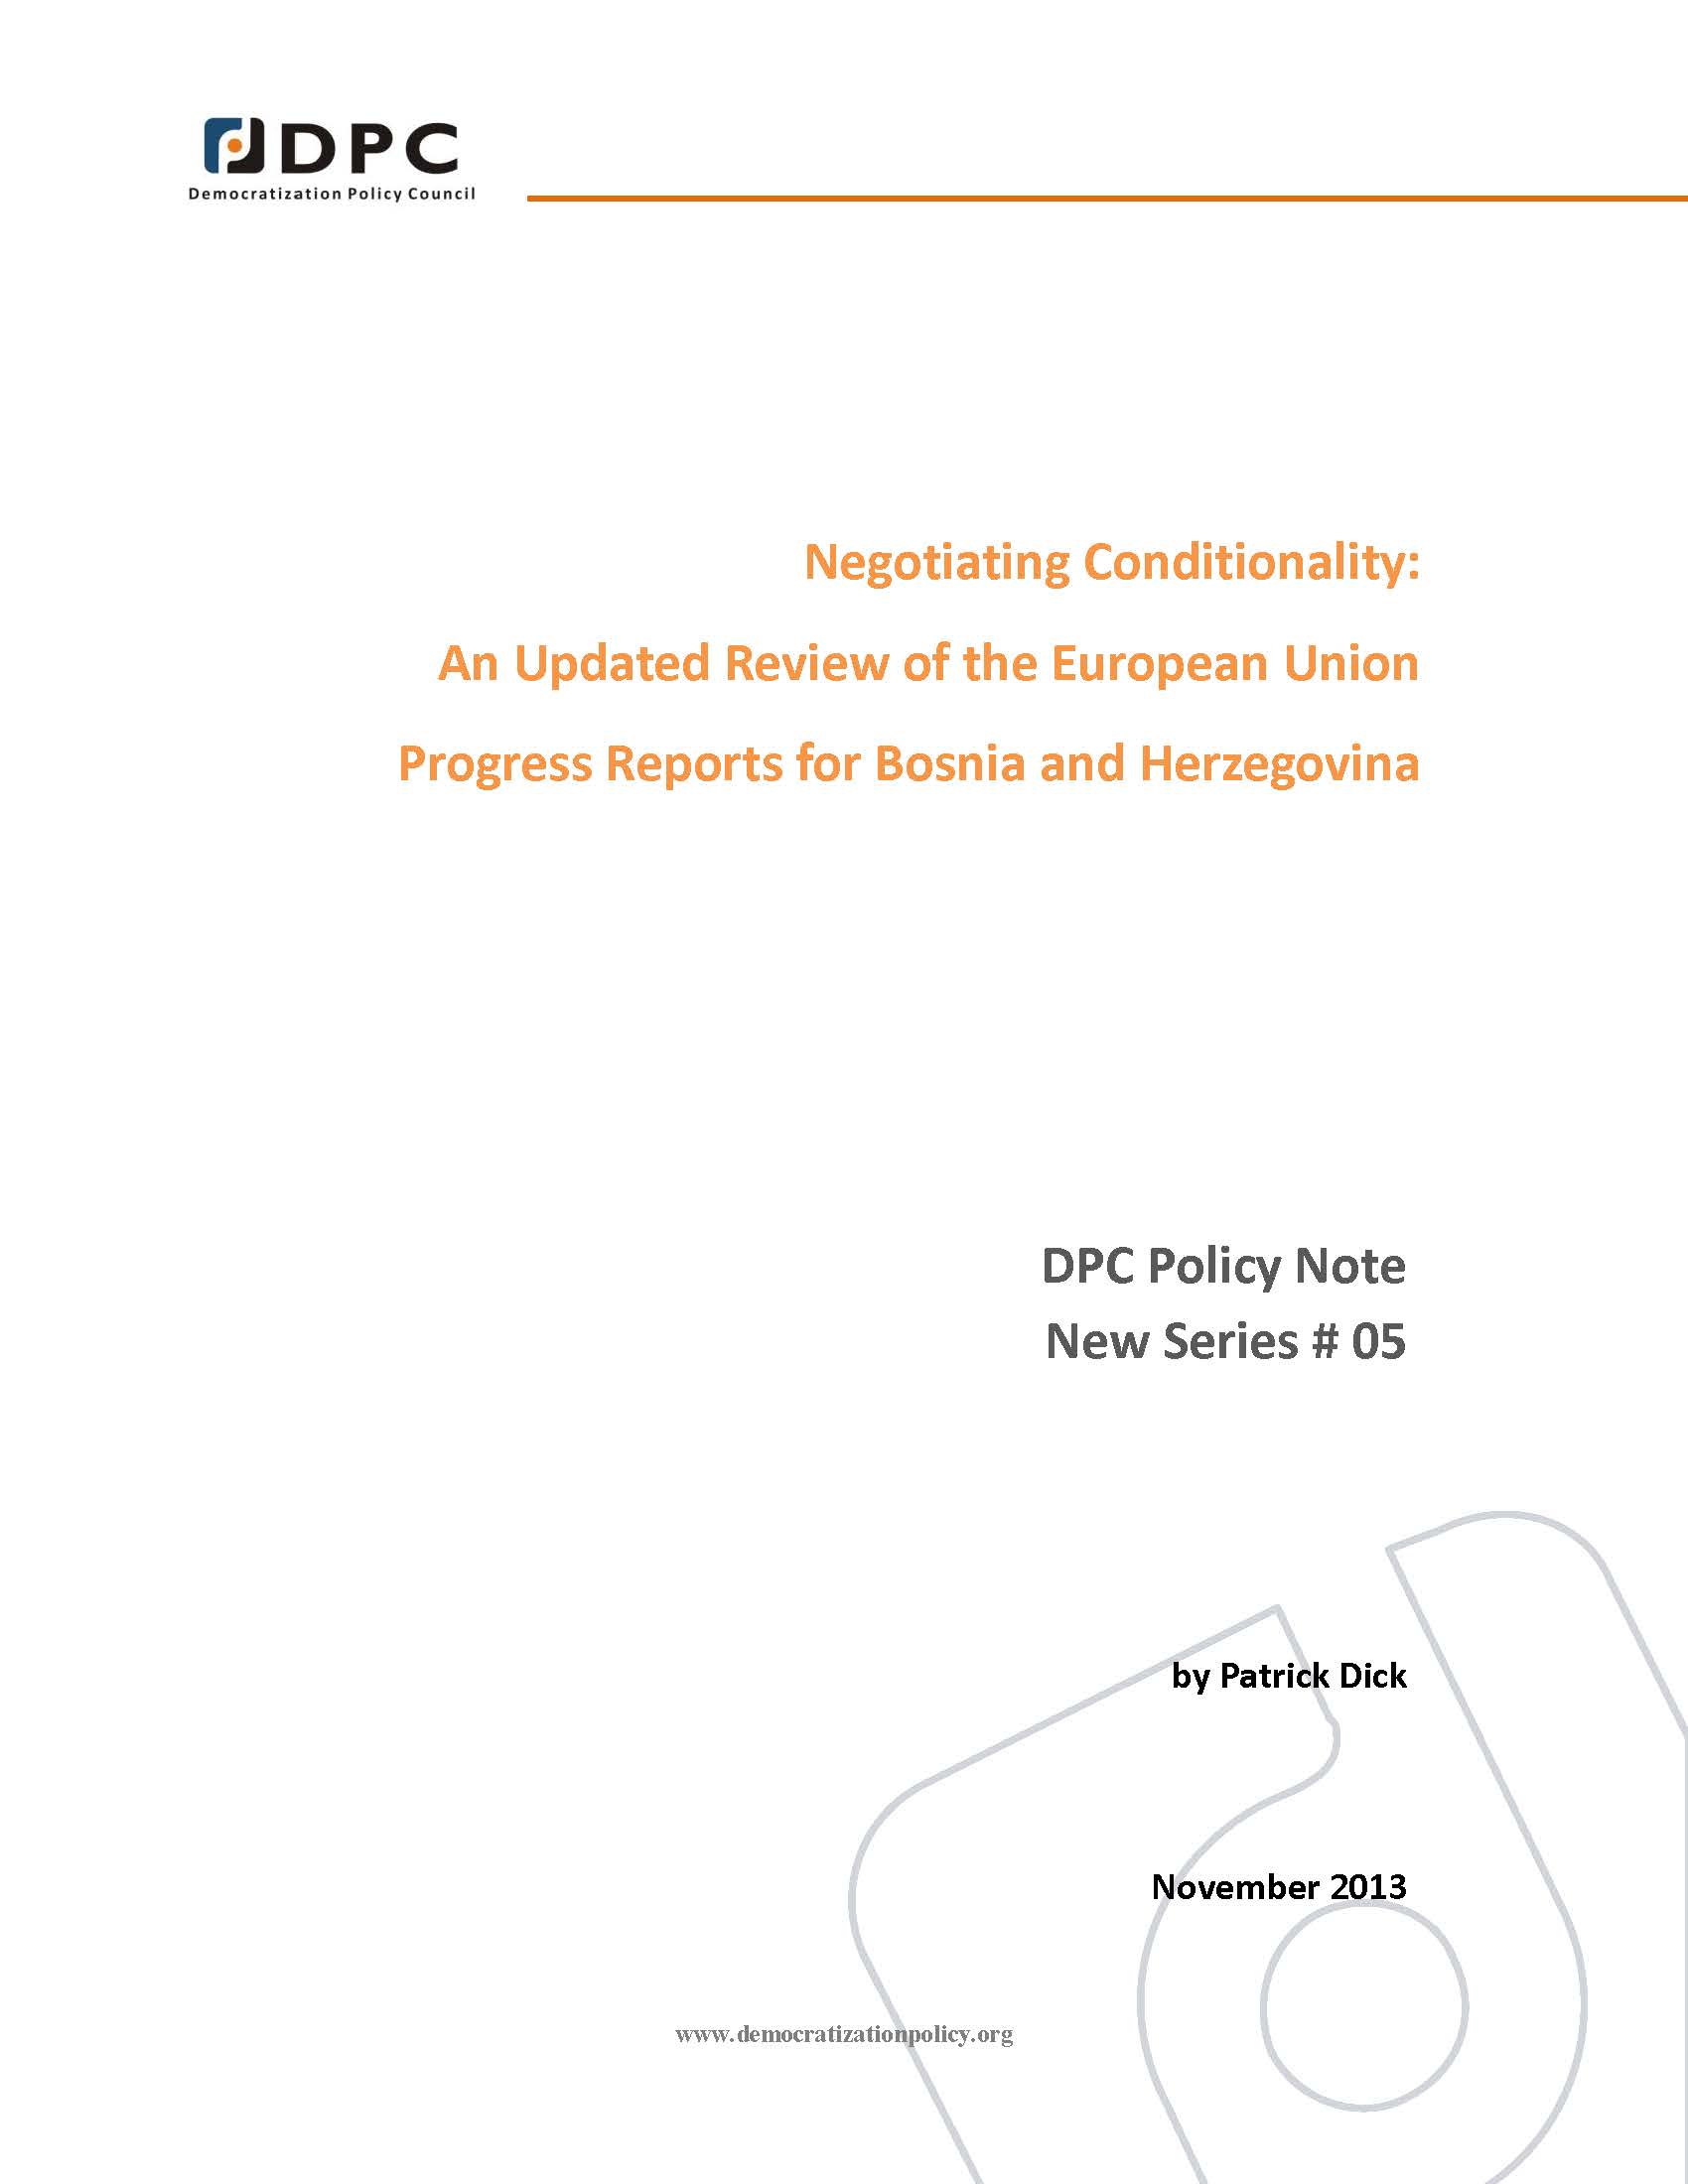 DPC POLICY NOTE 05: Negotiating Conditionality: An Updated Review of the European Union Progress Reports for Bosnia and Herzegovina.